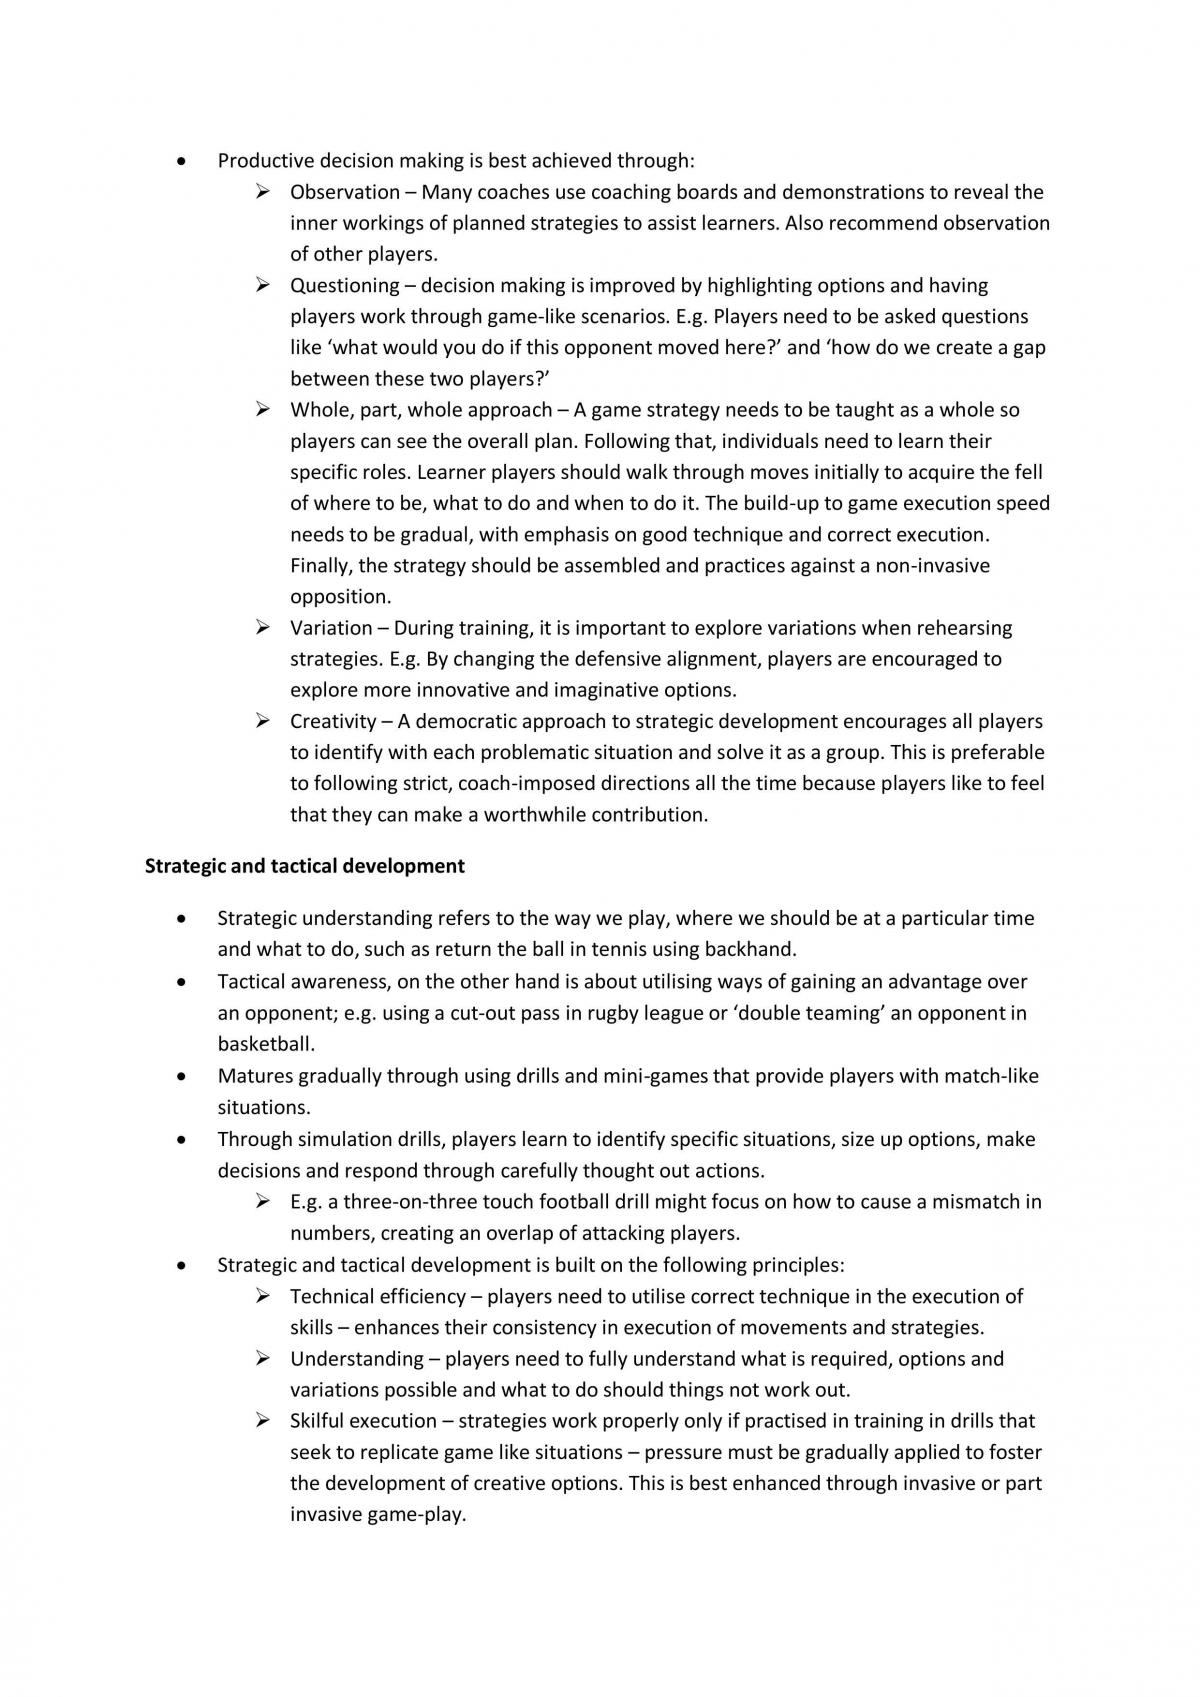 PDHPE study notes - Page 66